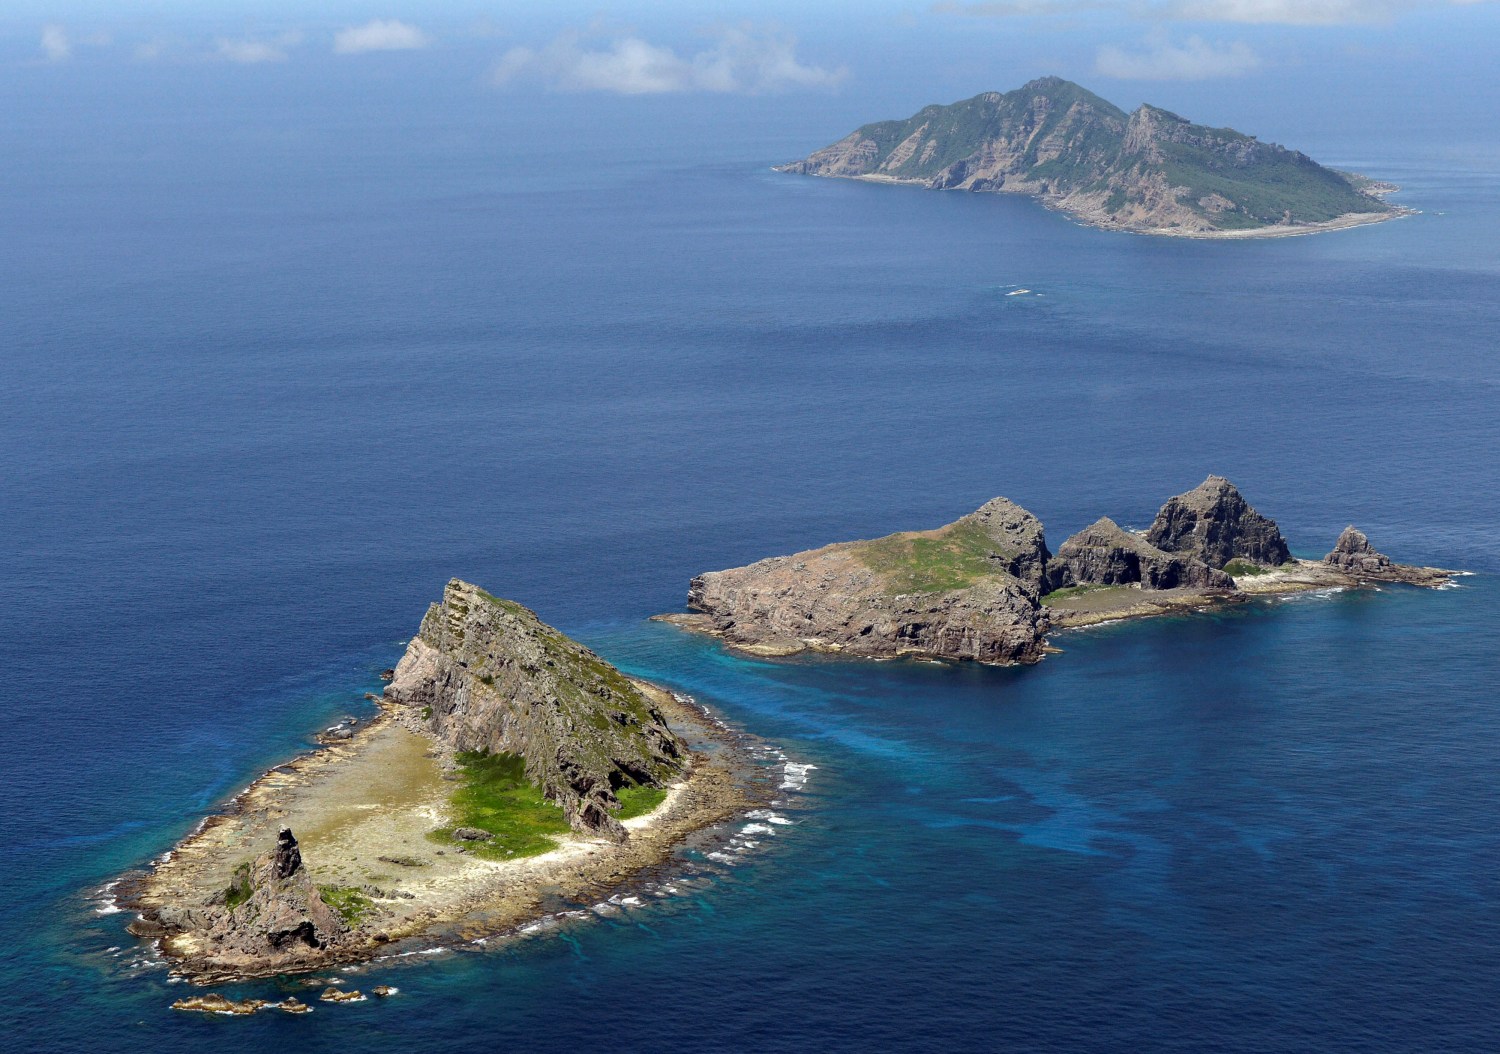 FILE PHOTO - A group of disputed islands, Uotsuri island (top), Minamikojima (bottom) and Kitakojima, known as Senkaku in Japan and Diaoyu in China is seen in the East China Sea, in this photo taken by Kyodo September 2012.  Mandatory credit. REUTERS/Kyodo/File Photo    ATTENTION EDITORS - FOR EDITORIAL USE ONLY. NOT FOR SALE FOR MARKETING OR ADVERTISING CAMPAIGNS. THIS IMAGE HAS BEEN SUPPLIED BY A THIRD PARTY. IT IS DISTRIBUTED, EXACTLY AS RECEIVED BY REUTERS, AS A SERVICE TO CLIENTS. MANDATORY CREDIT. JAPAN OUT. NO COMMERCIAL OR EDITORIAL SALES IN JAPAN         - S1AETIVBNCAA